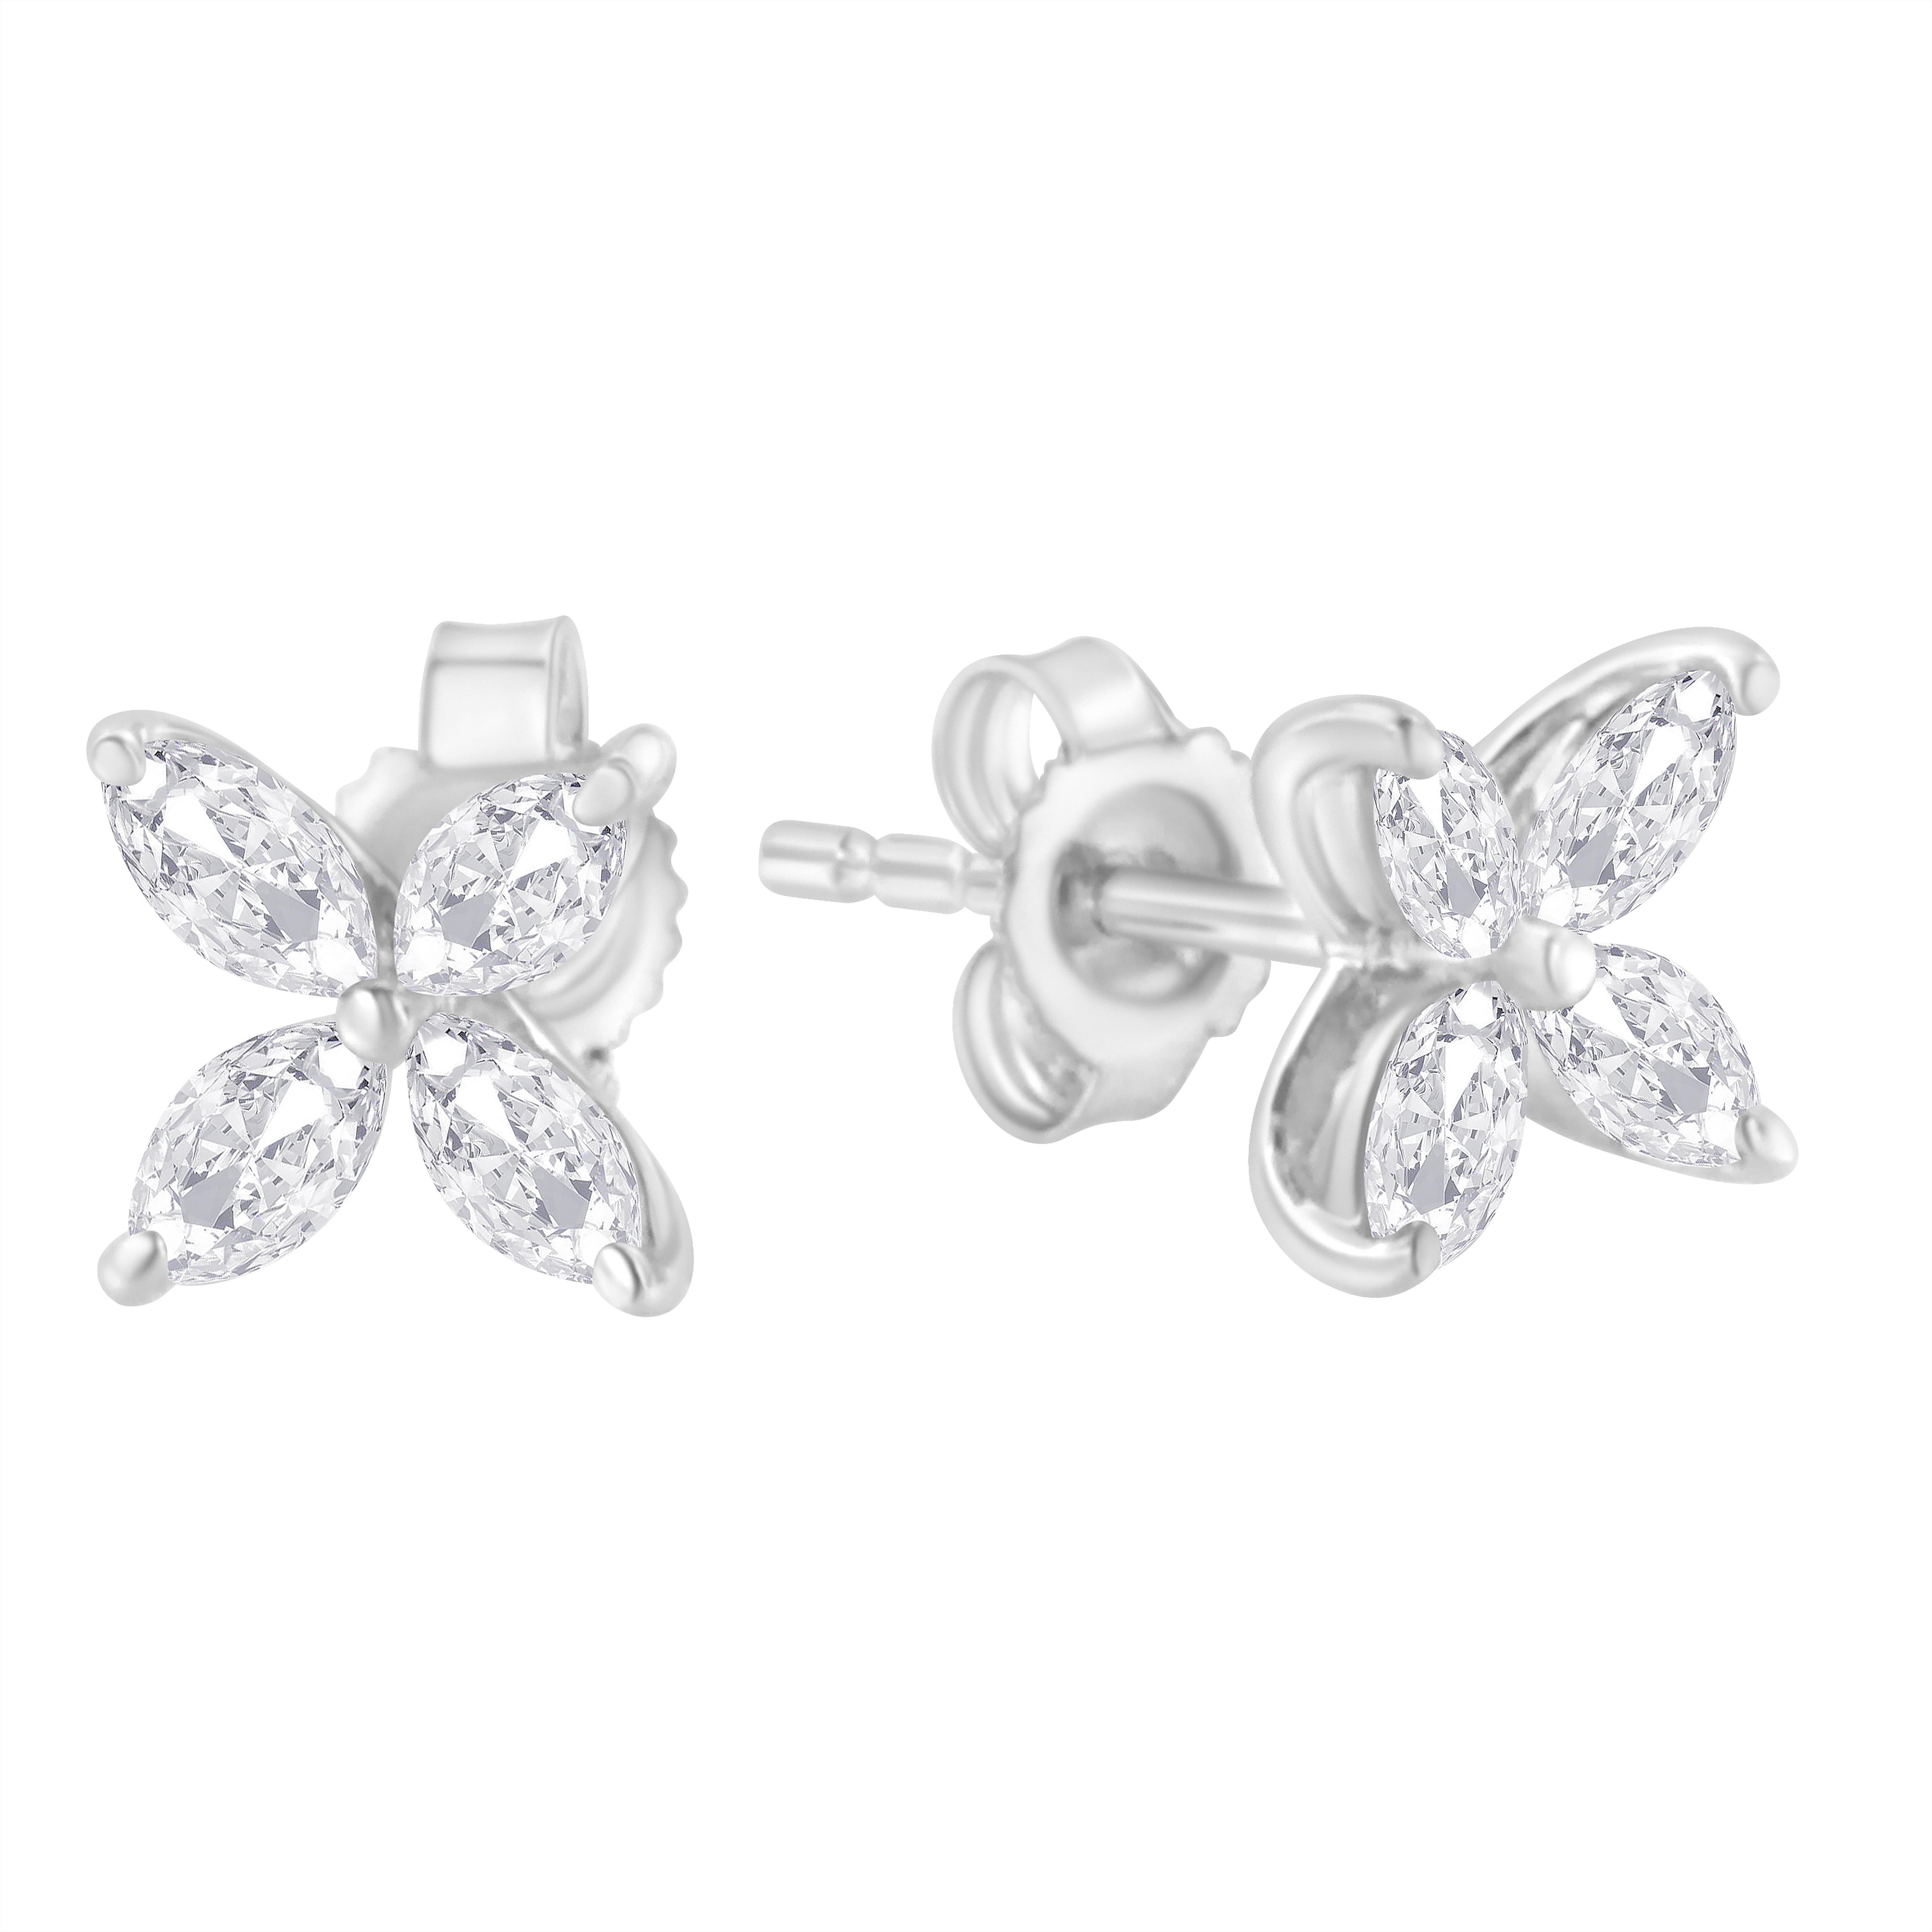 A pair of floral diamond earrings, each featuring 8 marquise shaped diamonds arranged to resemble a flower. These delicate earrings are crafted in 14 karat white gold, and have a total diamond weight of 3/4 carat. These natural diamonds are color